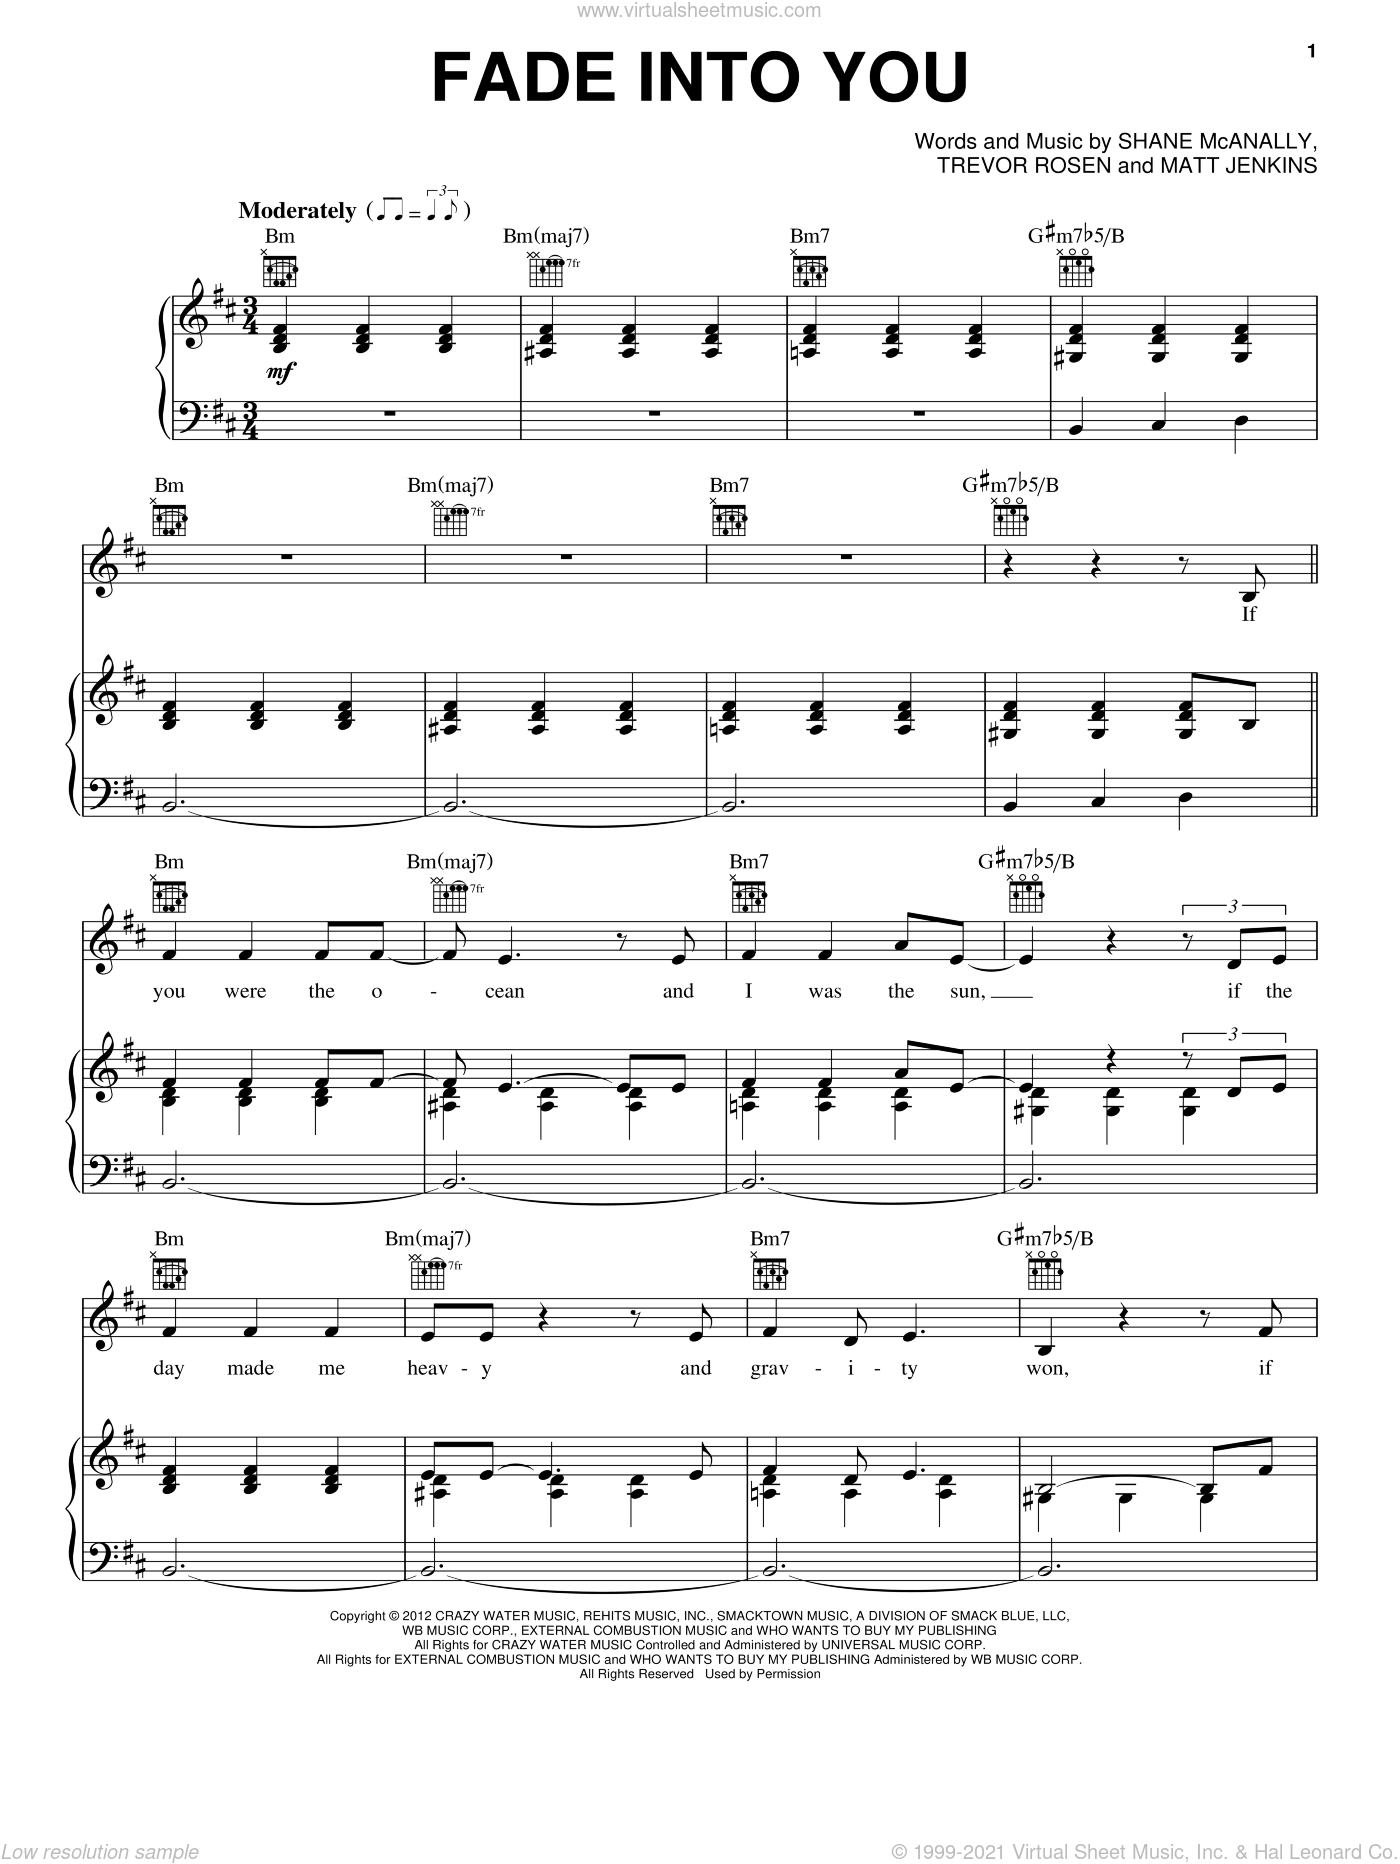 Free sheet music preview of Fade Into You for voice, piano or guitar by Mat...